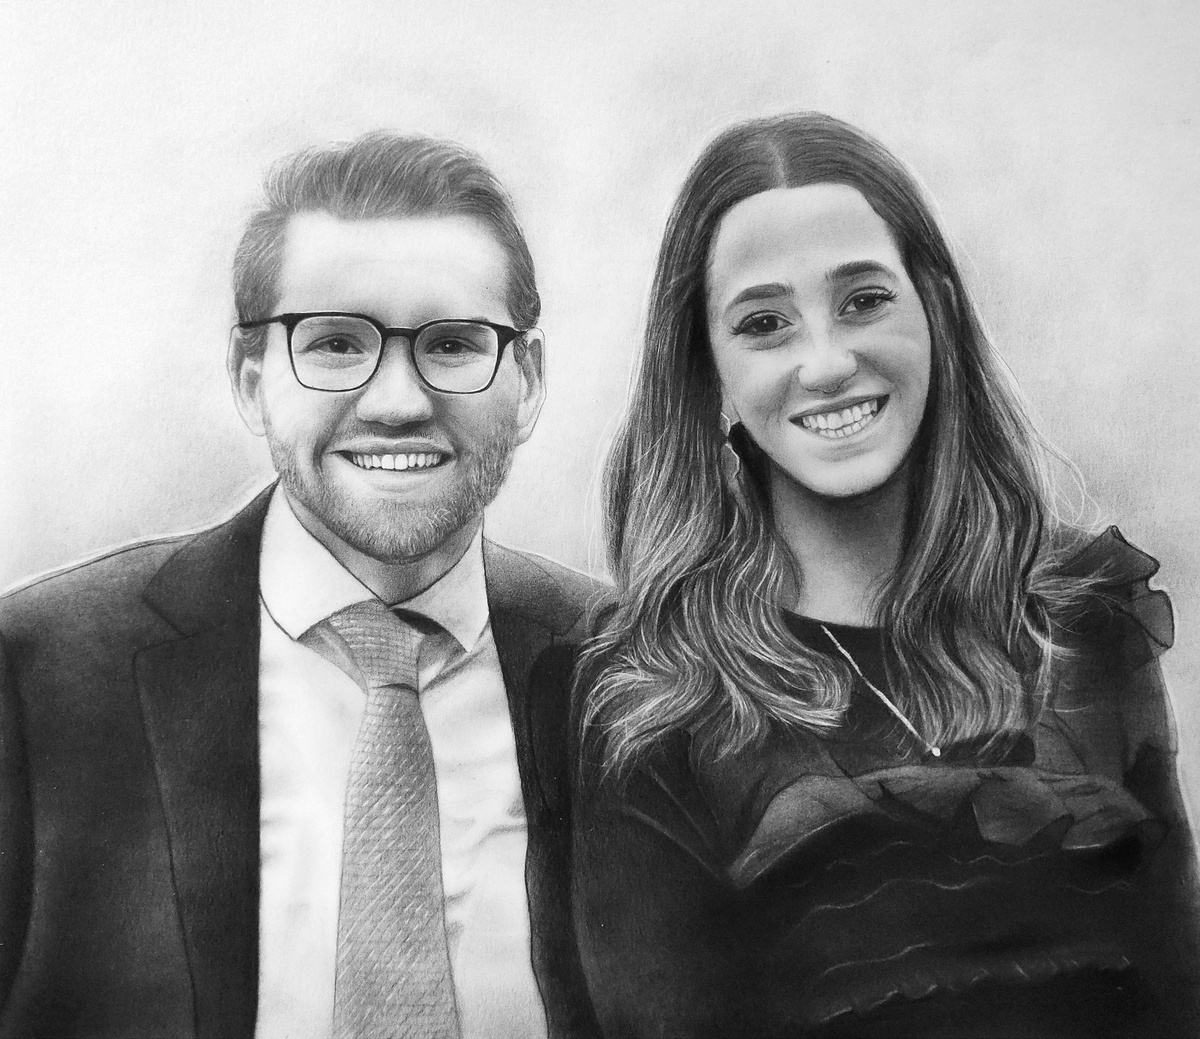 A custom black and white couple portrait drawing.